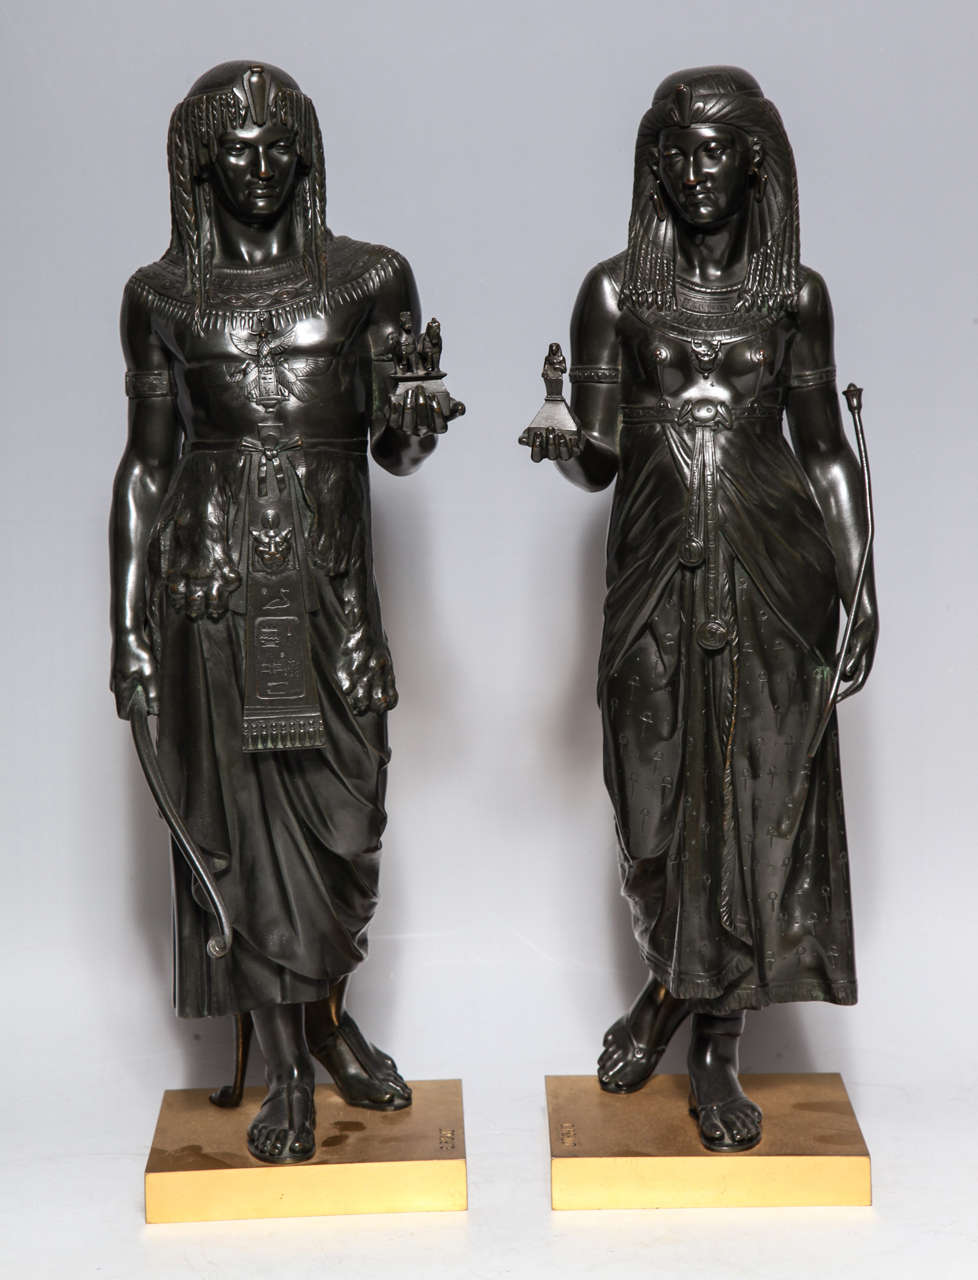 AN IMPORTANT PAIR OF ANTIQUE FRENCH PATINATED BRONZE FIGURES OF ROYAL EGYPTIAN FIGURES PRESENTING GIFTS TO THE PHARAOH ON DORE BRONZE SQUARE FORM PLINTHS By EMILE-LOUIS PICAULT